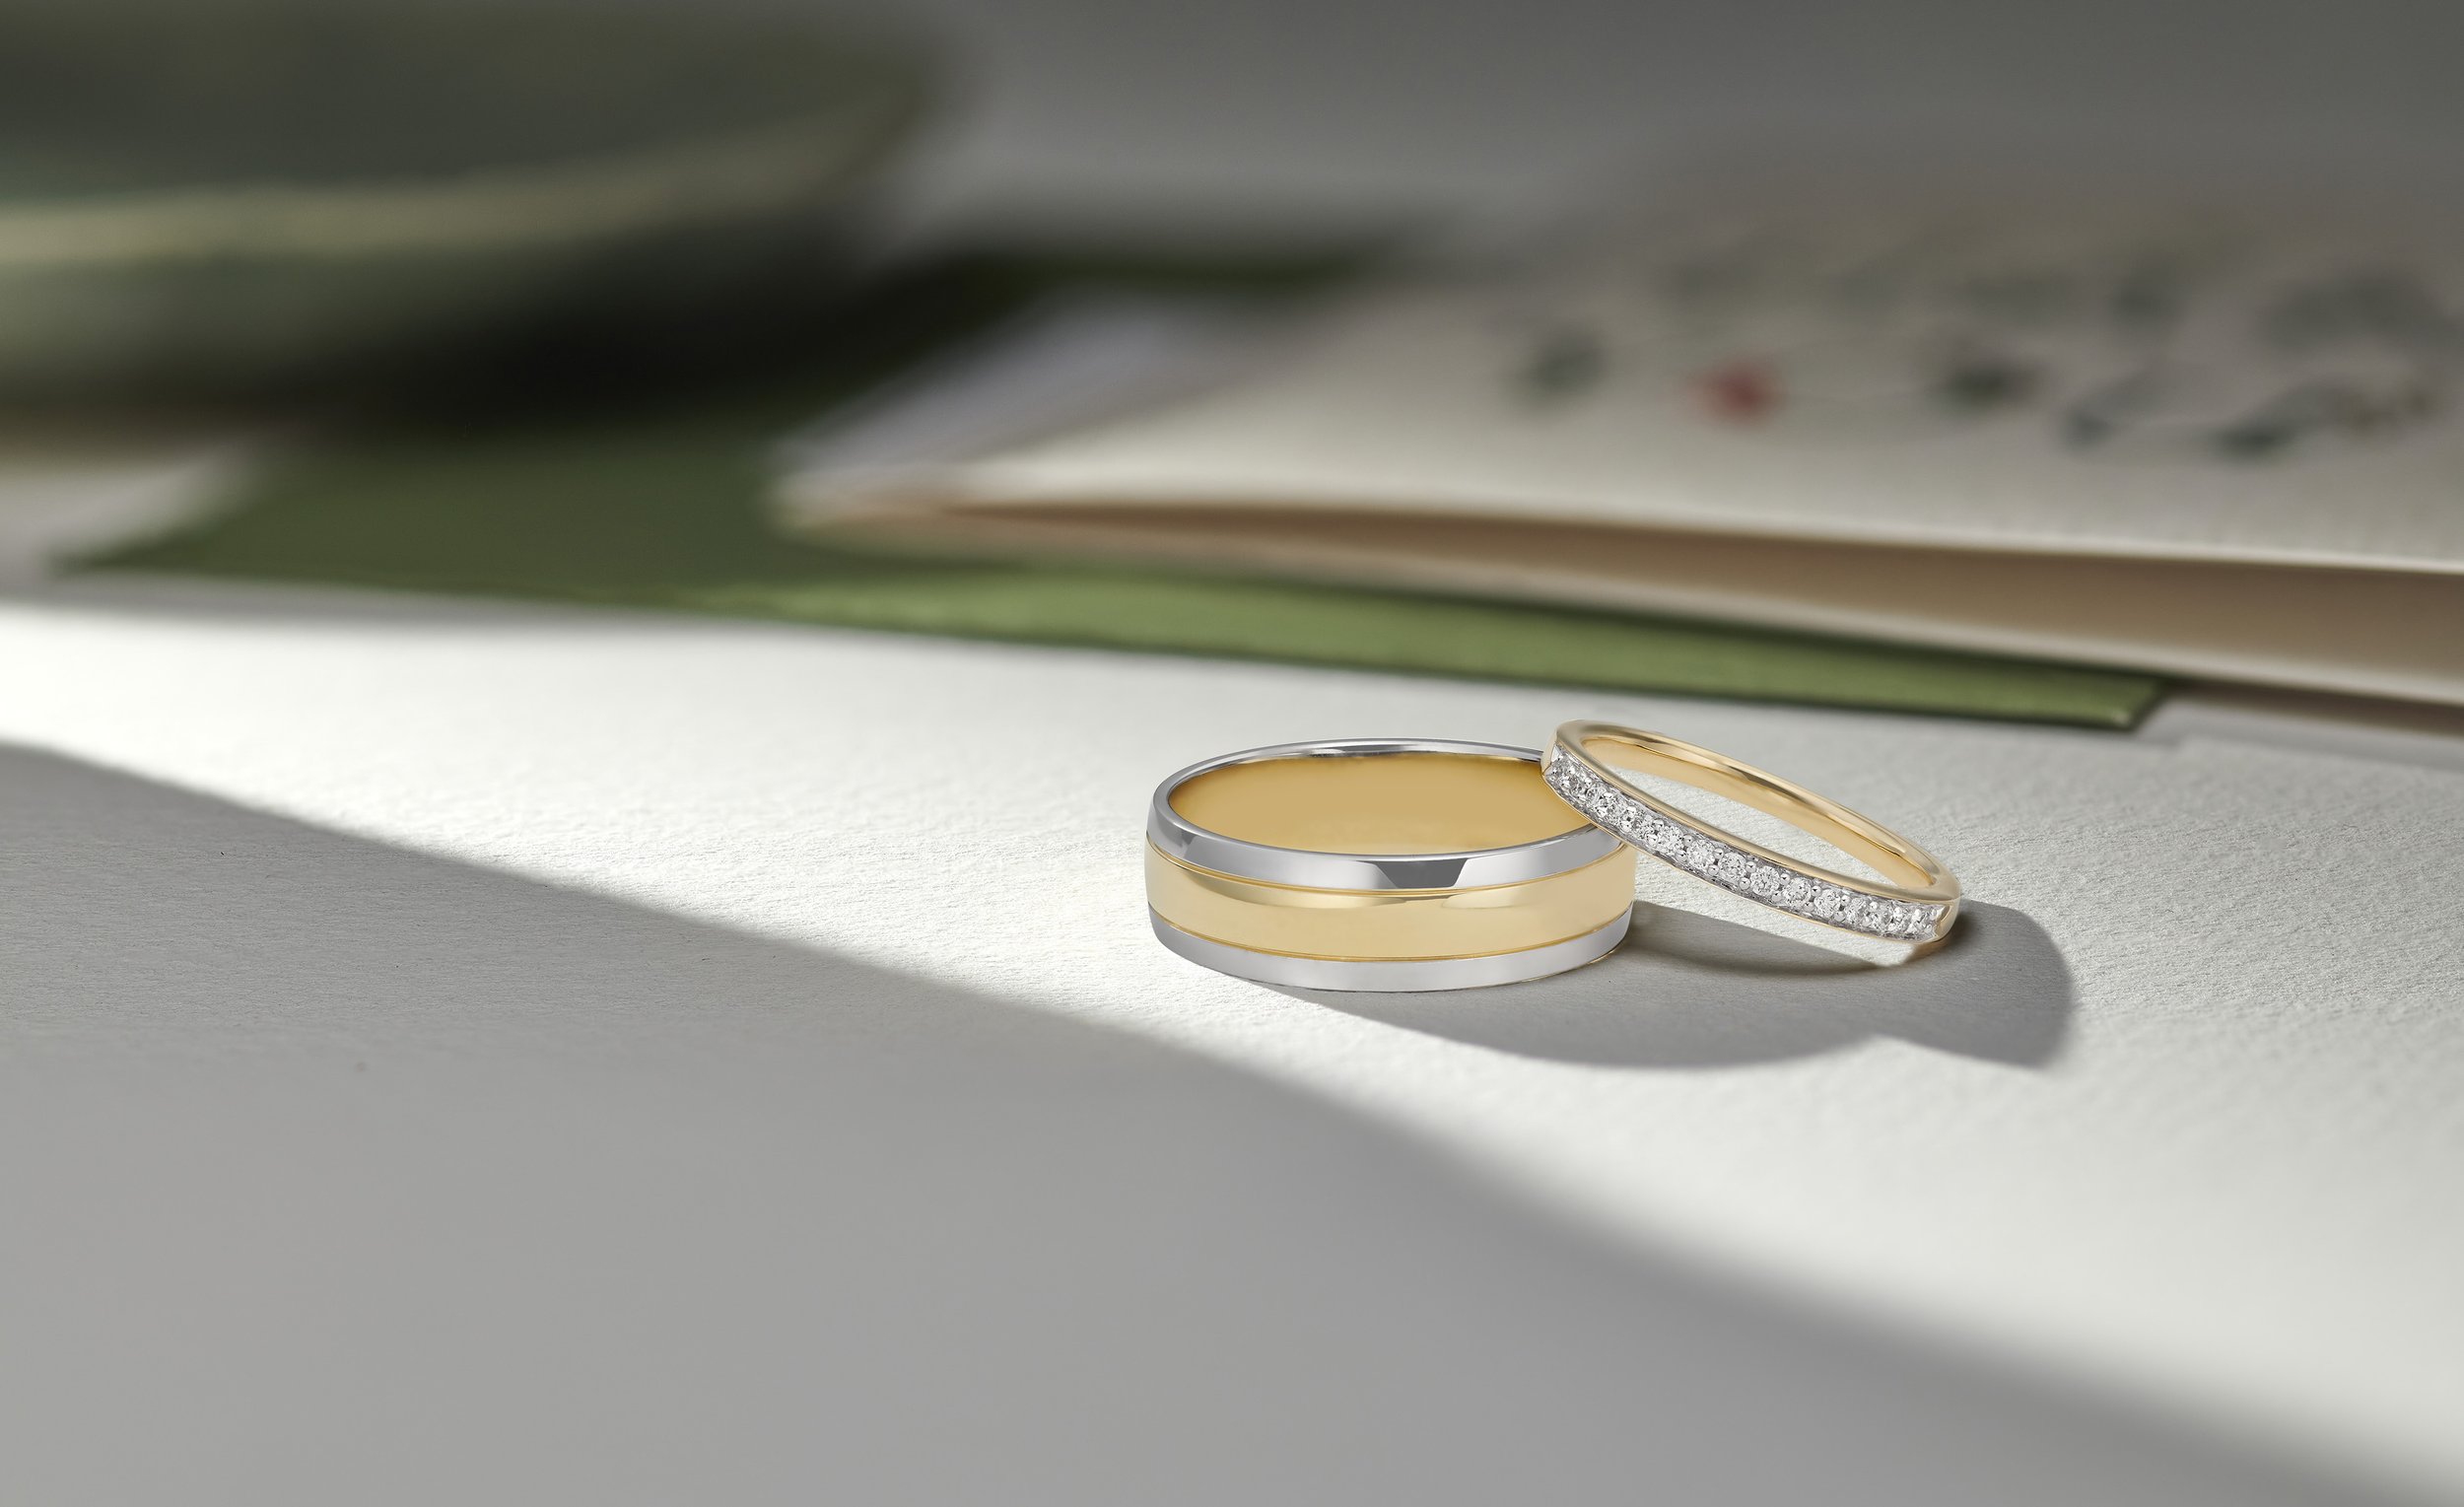 Wedding Rings Images and Invitation Designs | Free Photos, PNG & PSD  Mockups, Vector Designs, Illustrations & Wallpapers - rawpixel